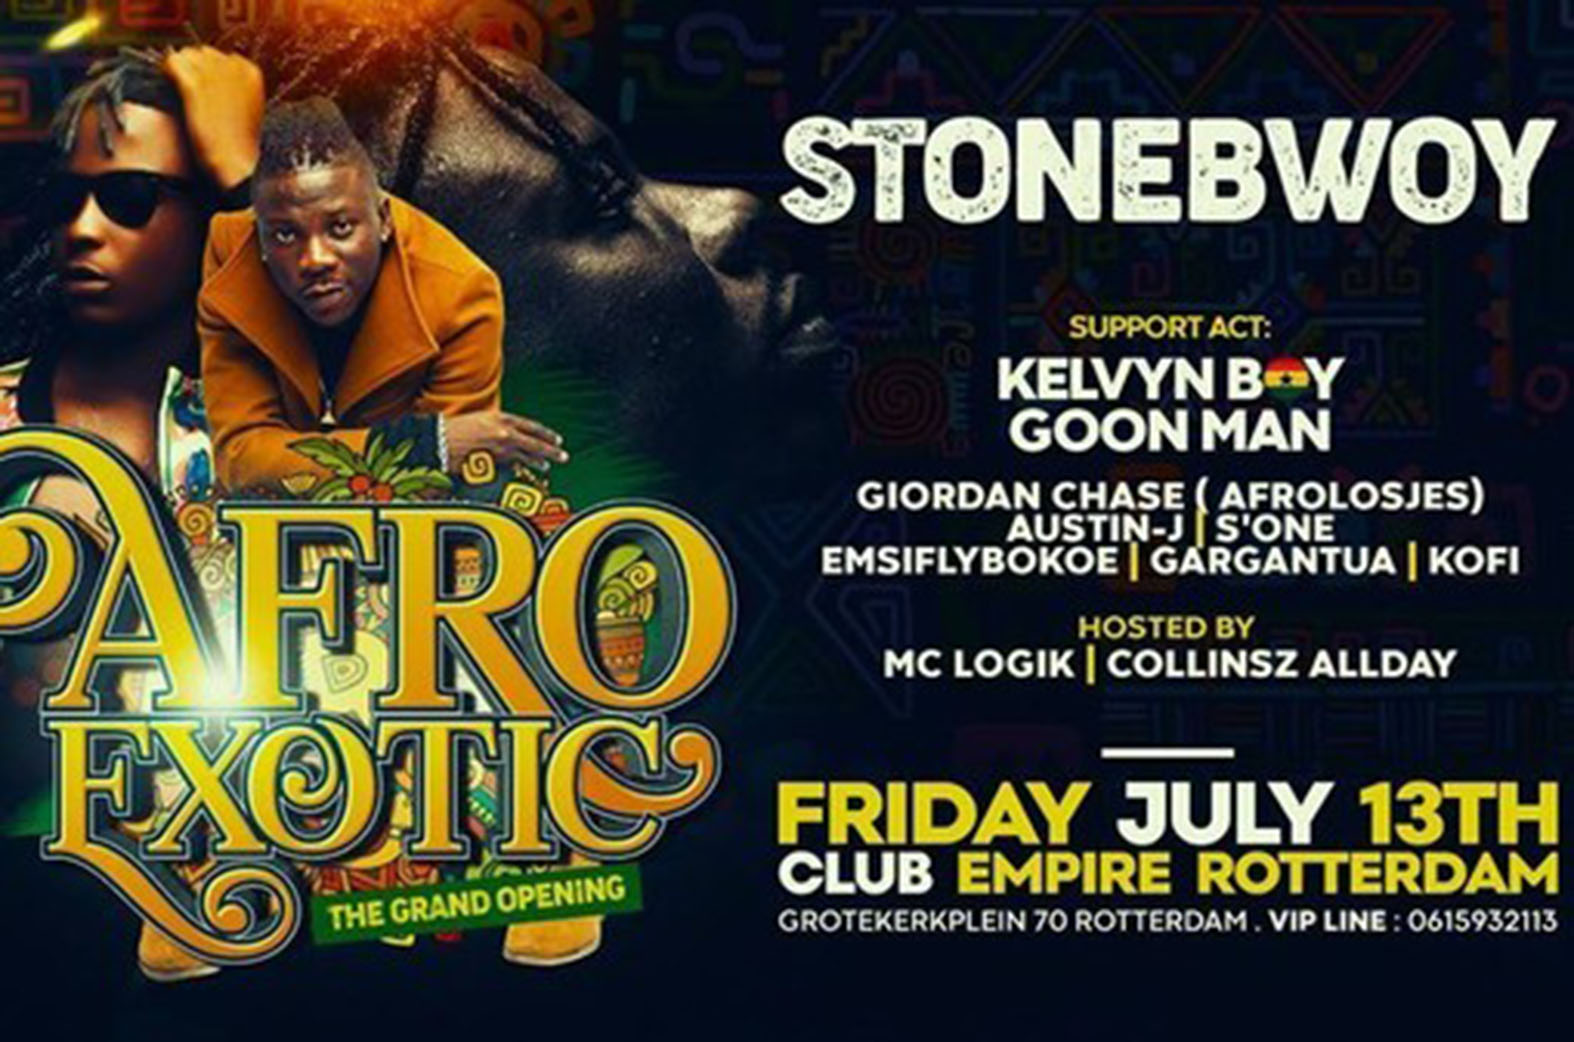 Rotterdam to host Stonebwoy’s 5th Europe Tour on 13th July